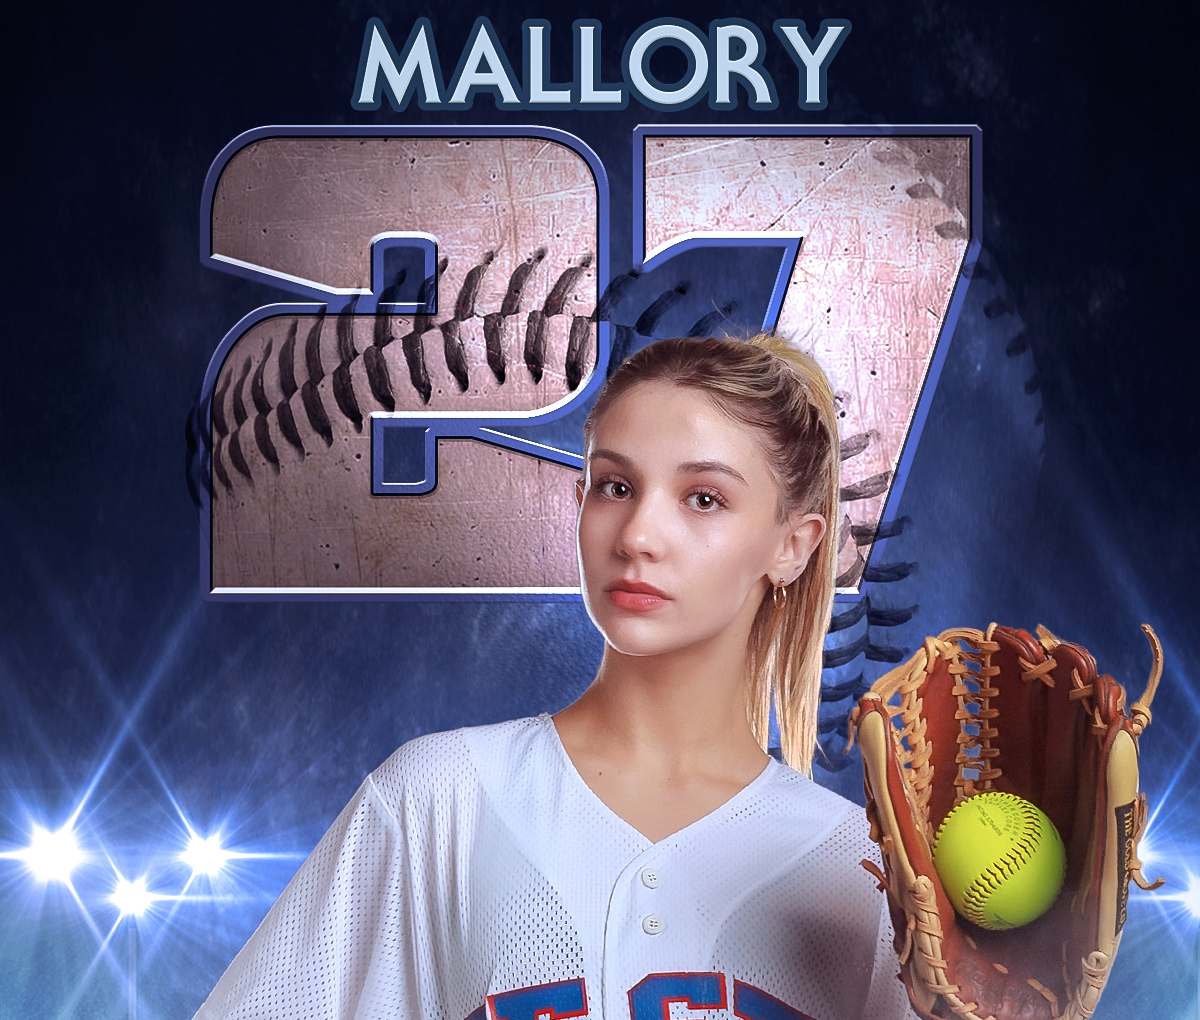 Photo a teenage female softball player photographed by Design by Sheila sports photographer